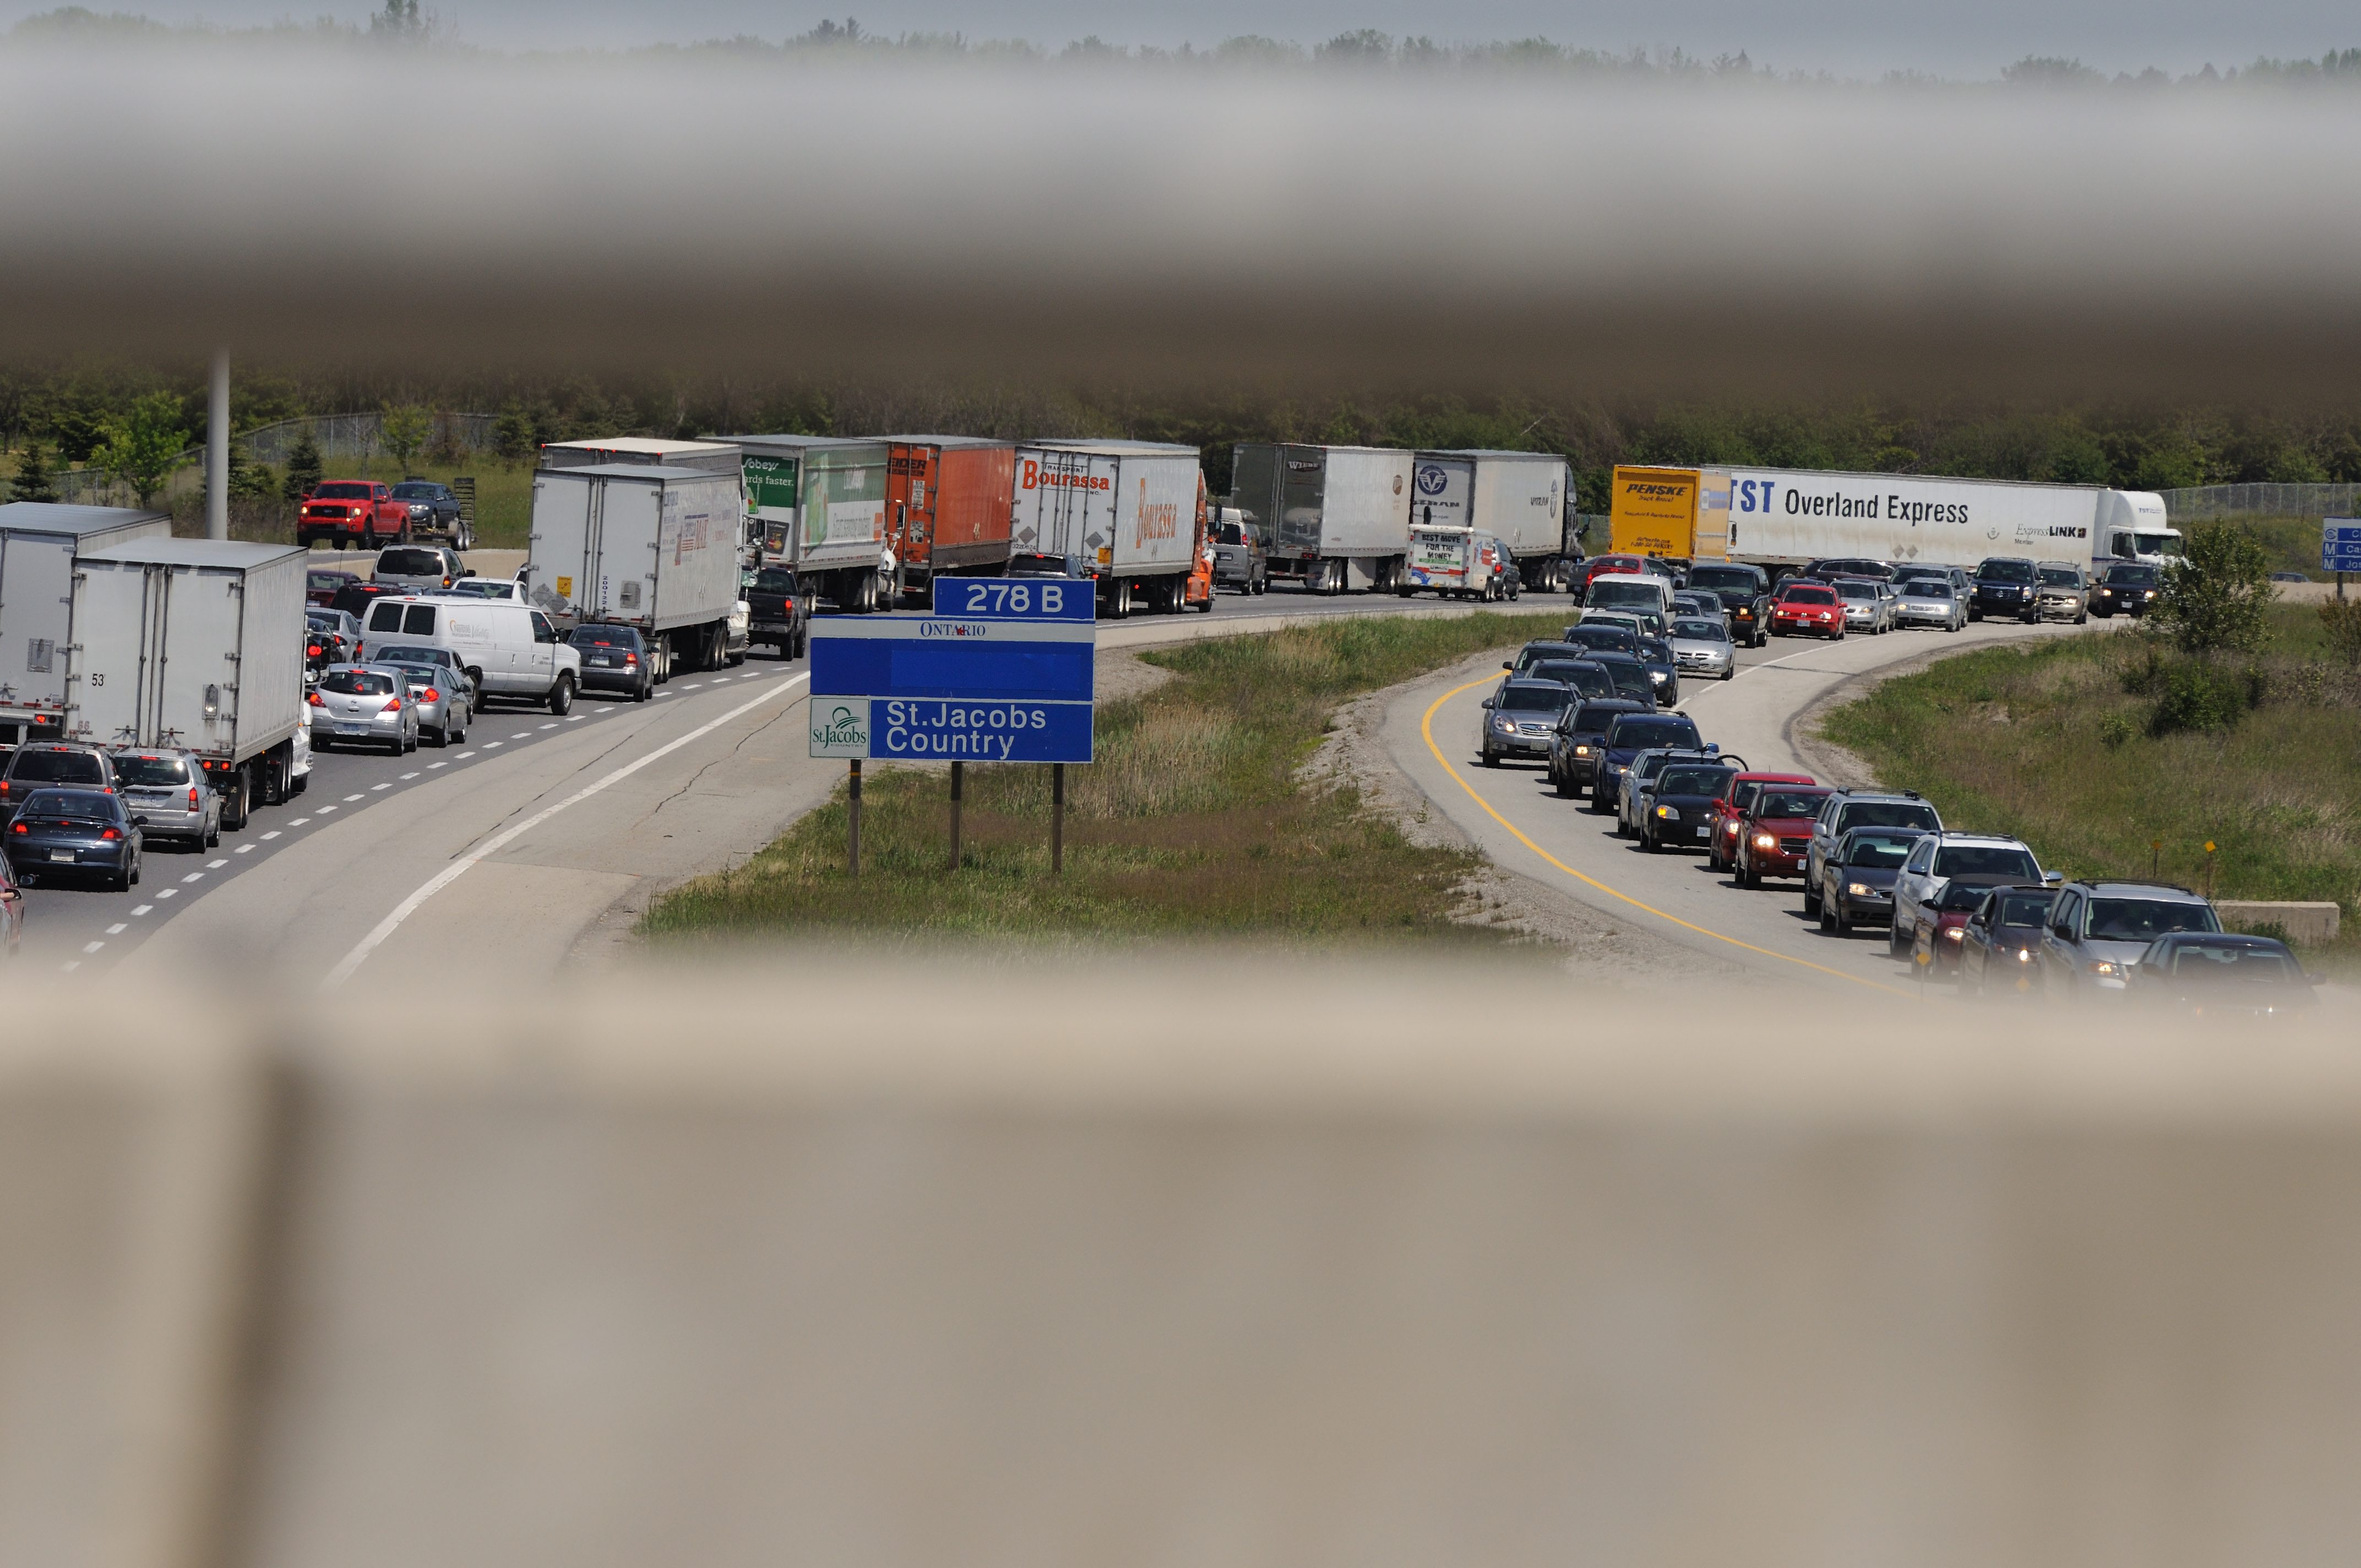 Ontario expands section of Highway 401 to 10 lanes